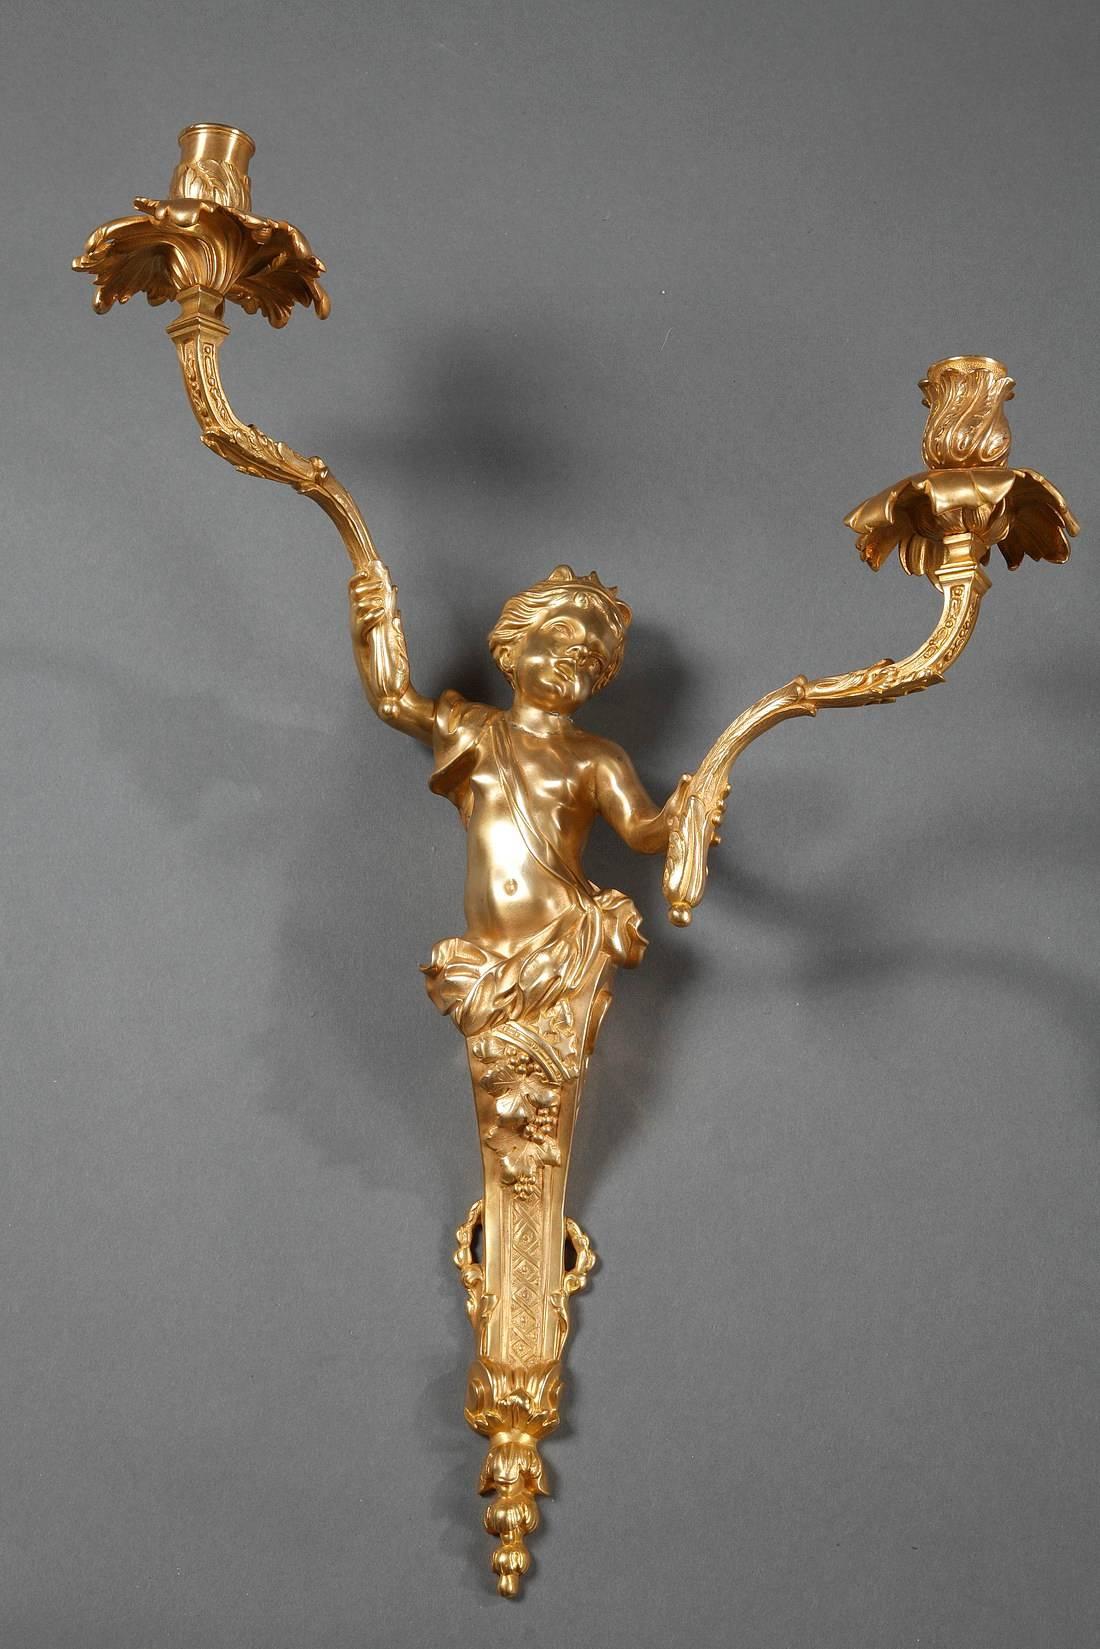 Pair of Napoleon III Ormolu sconces in Louis XV style. Each sconce is decorated with a child wearing flowing garments and holds in its arms the candlestick arms. The nozzles are decorated with lively foliage,

 
circa 1860
Dimensions: W 15 in, D